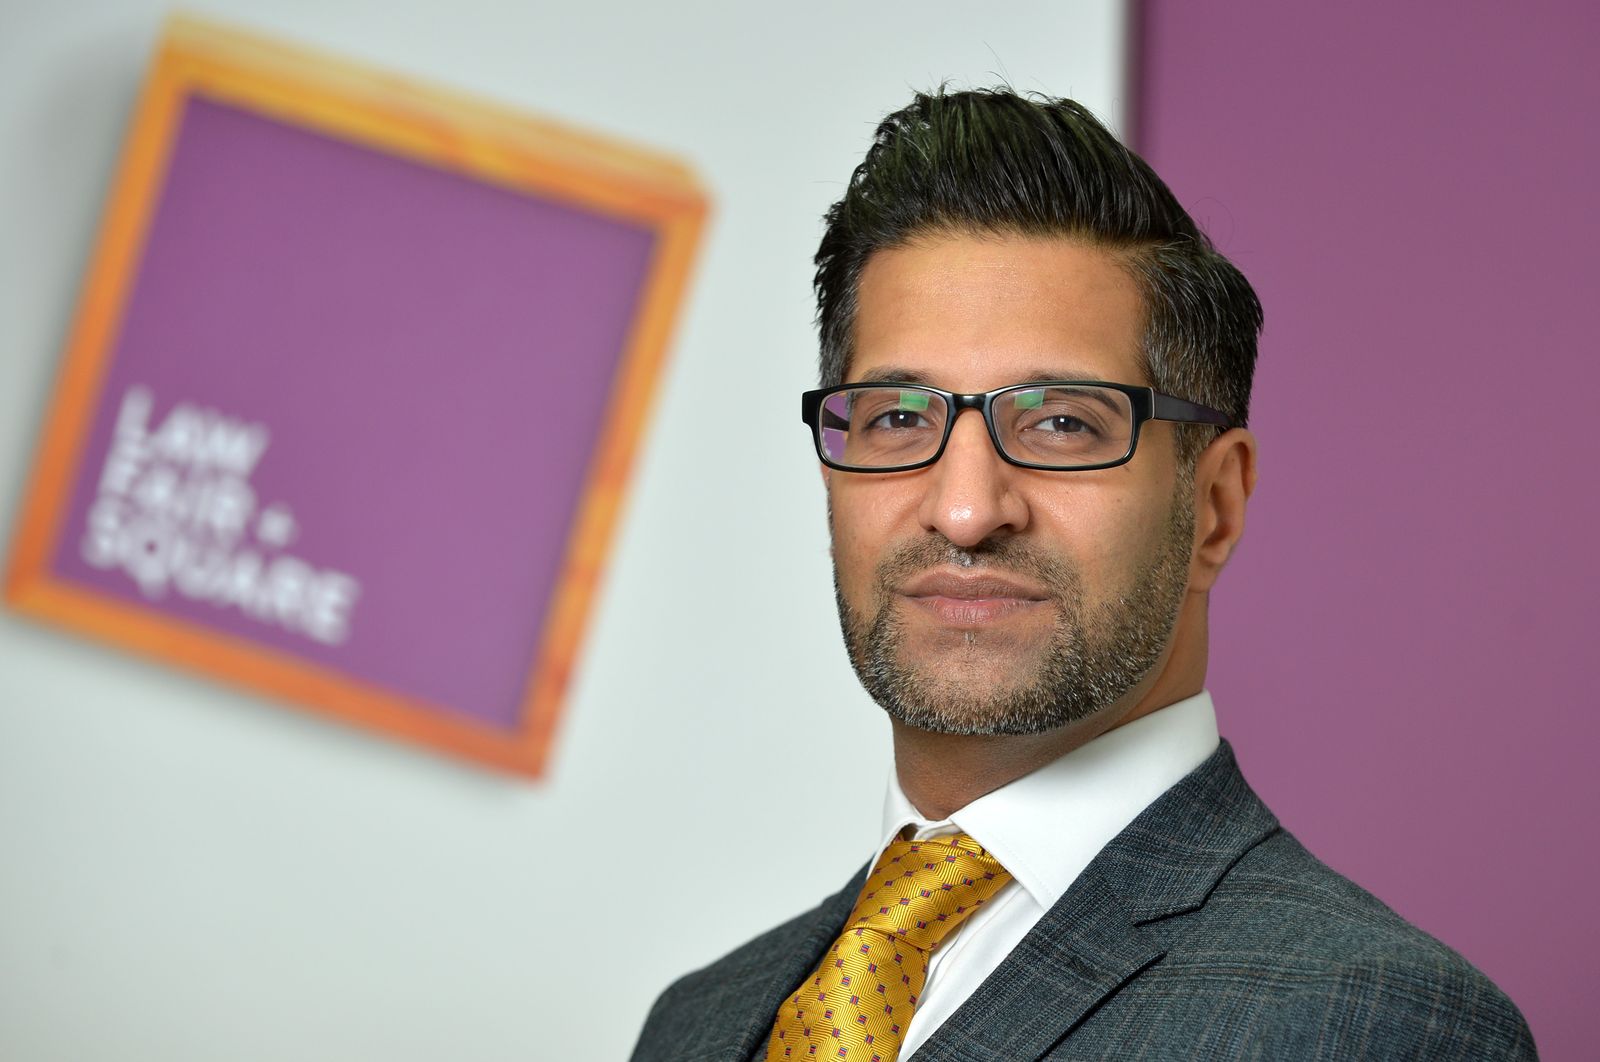 Yorkshire lawyer awarded specialist qualification